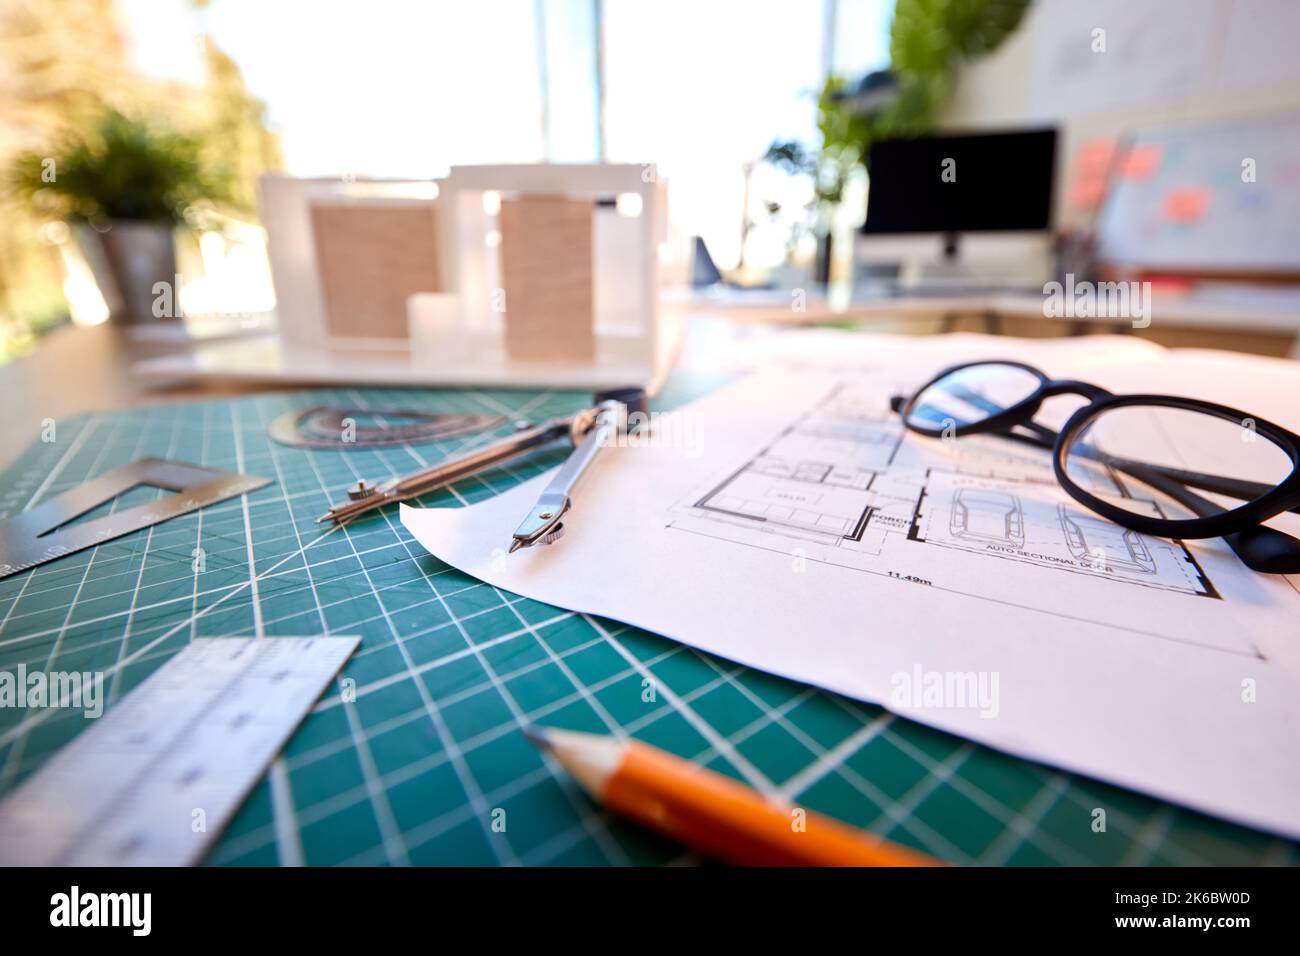 Desk In Architects Office With Plans Drawing Instruments And Model Stock Photo